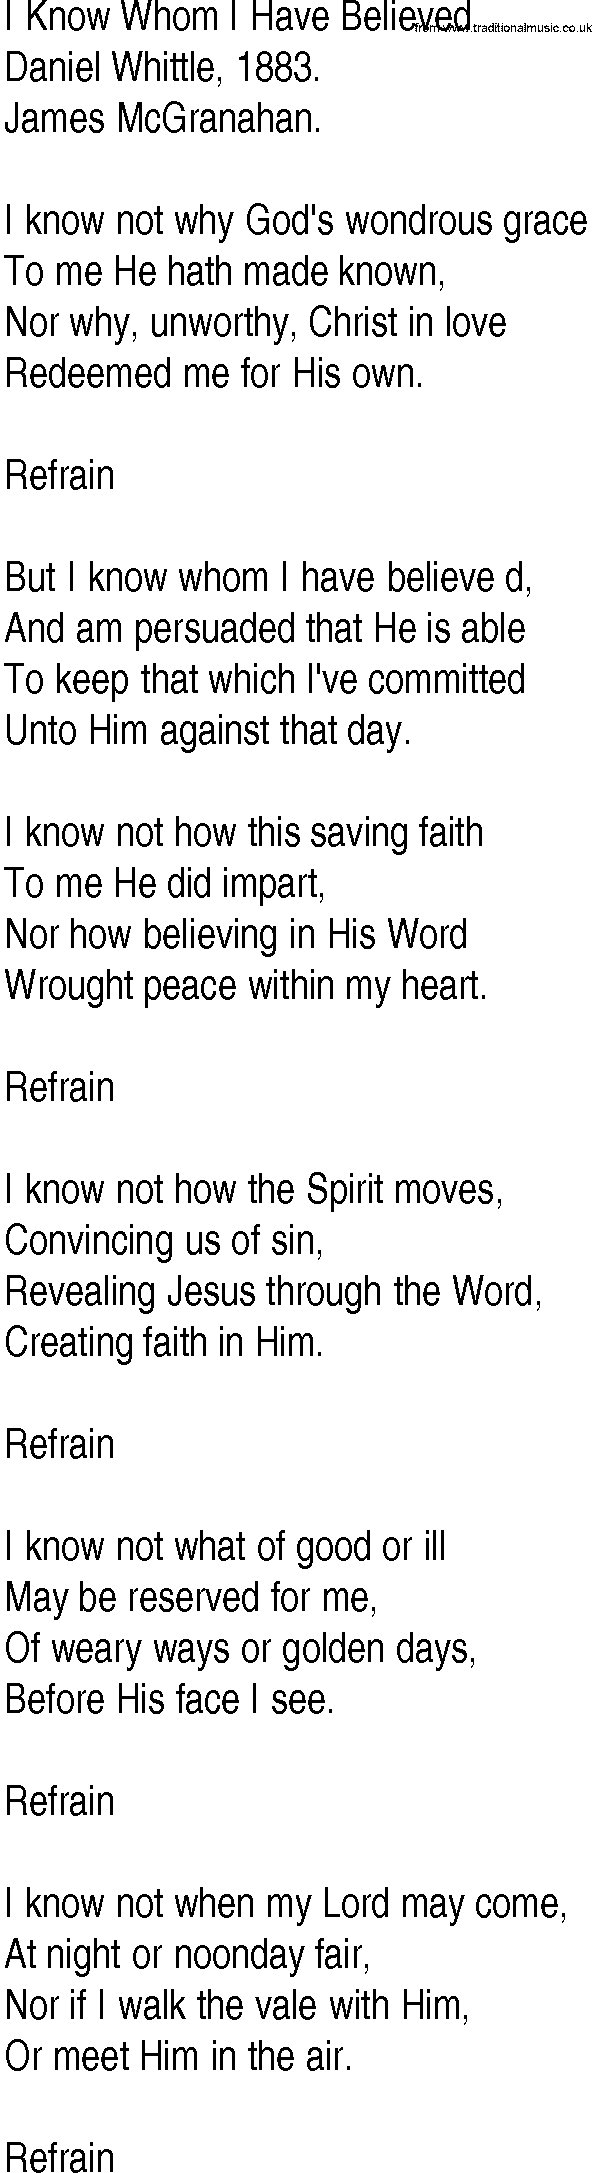 Hymn and Gospel Song: I Know Whom I Have Believed by Daniel Whittle lyrics